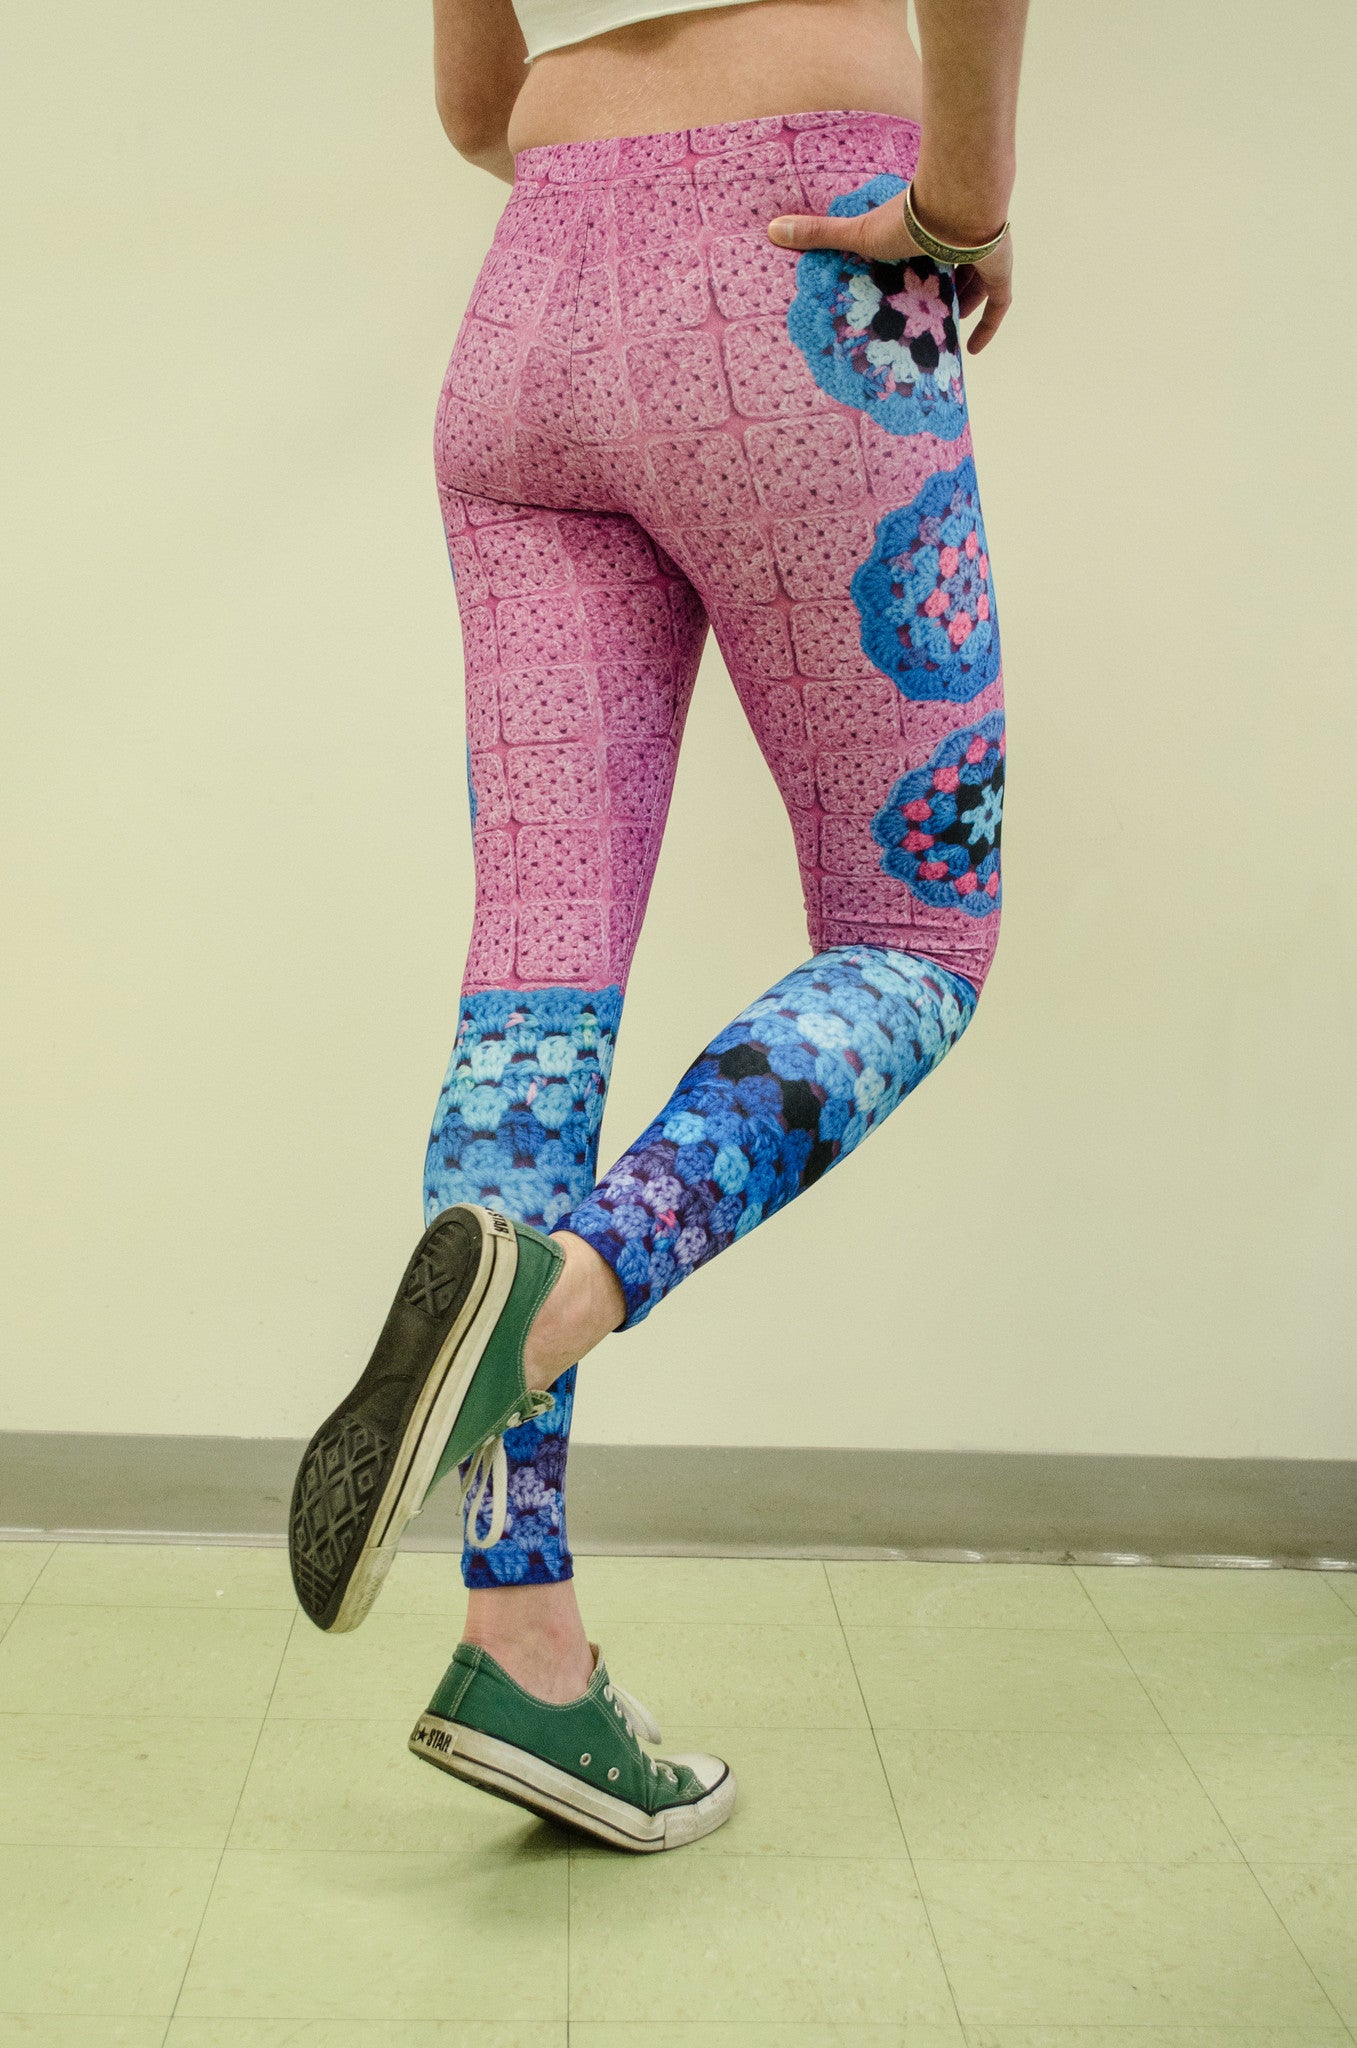 Snapdragon Brand Clothing Granny Square Crochet Print pink and turquoise leggings in style Mermaid Queen features a 1960s vintage boho feel and an ocean of colors. Made of comfortable spandex.